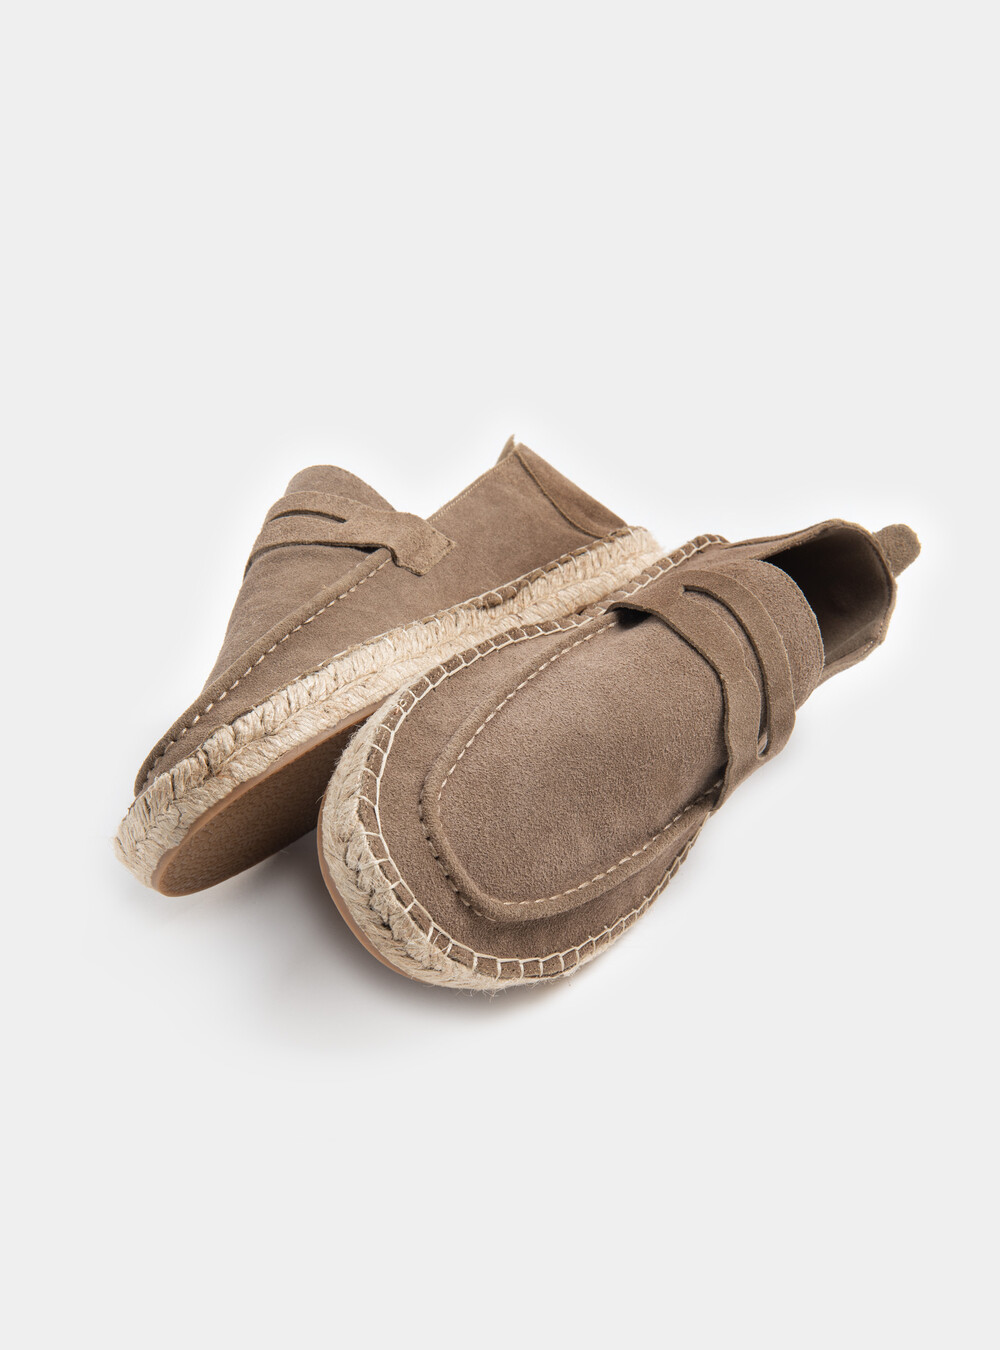 Espadrilles-style moccasin